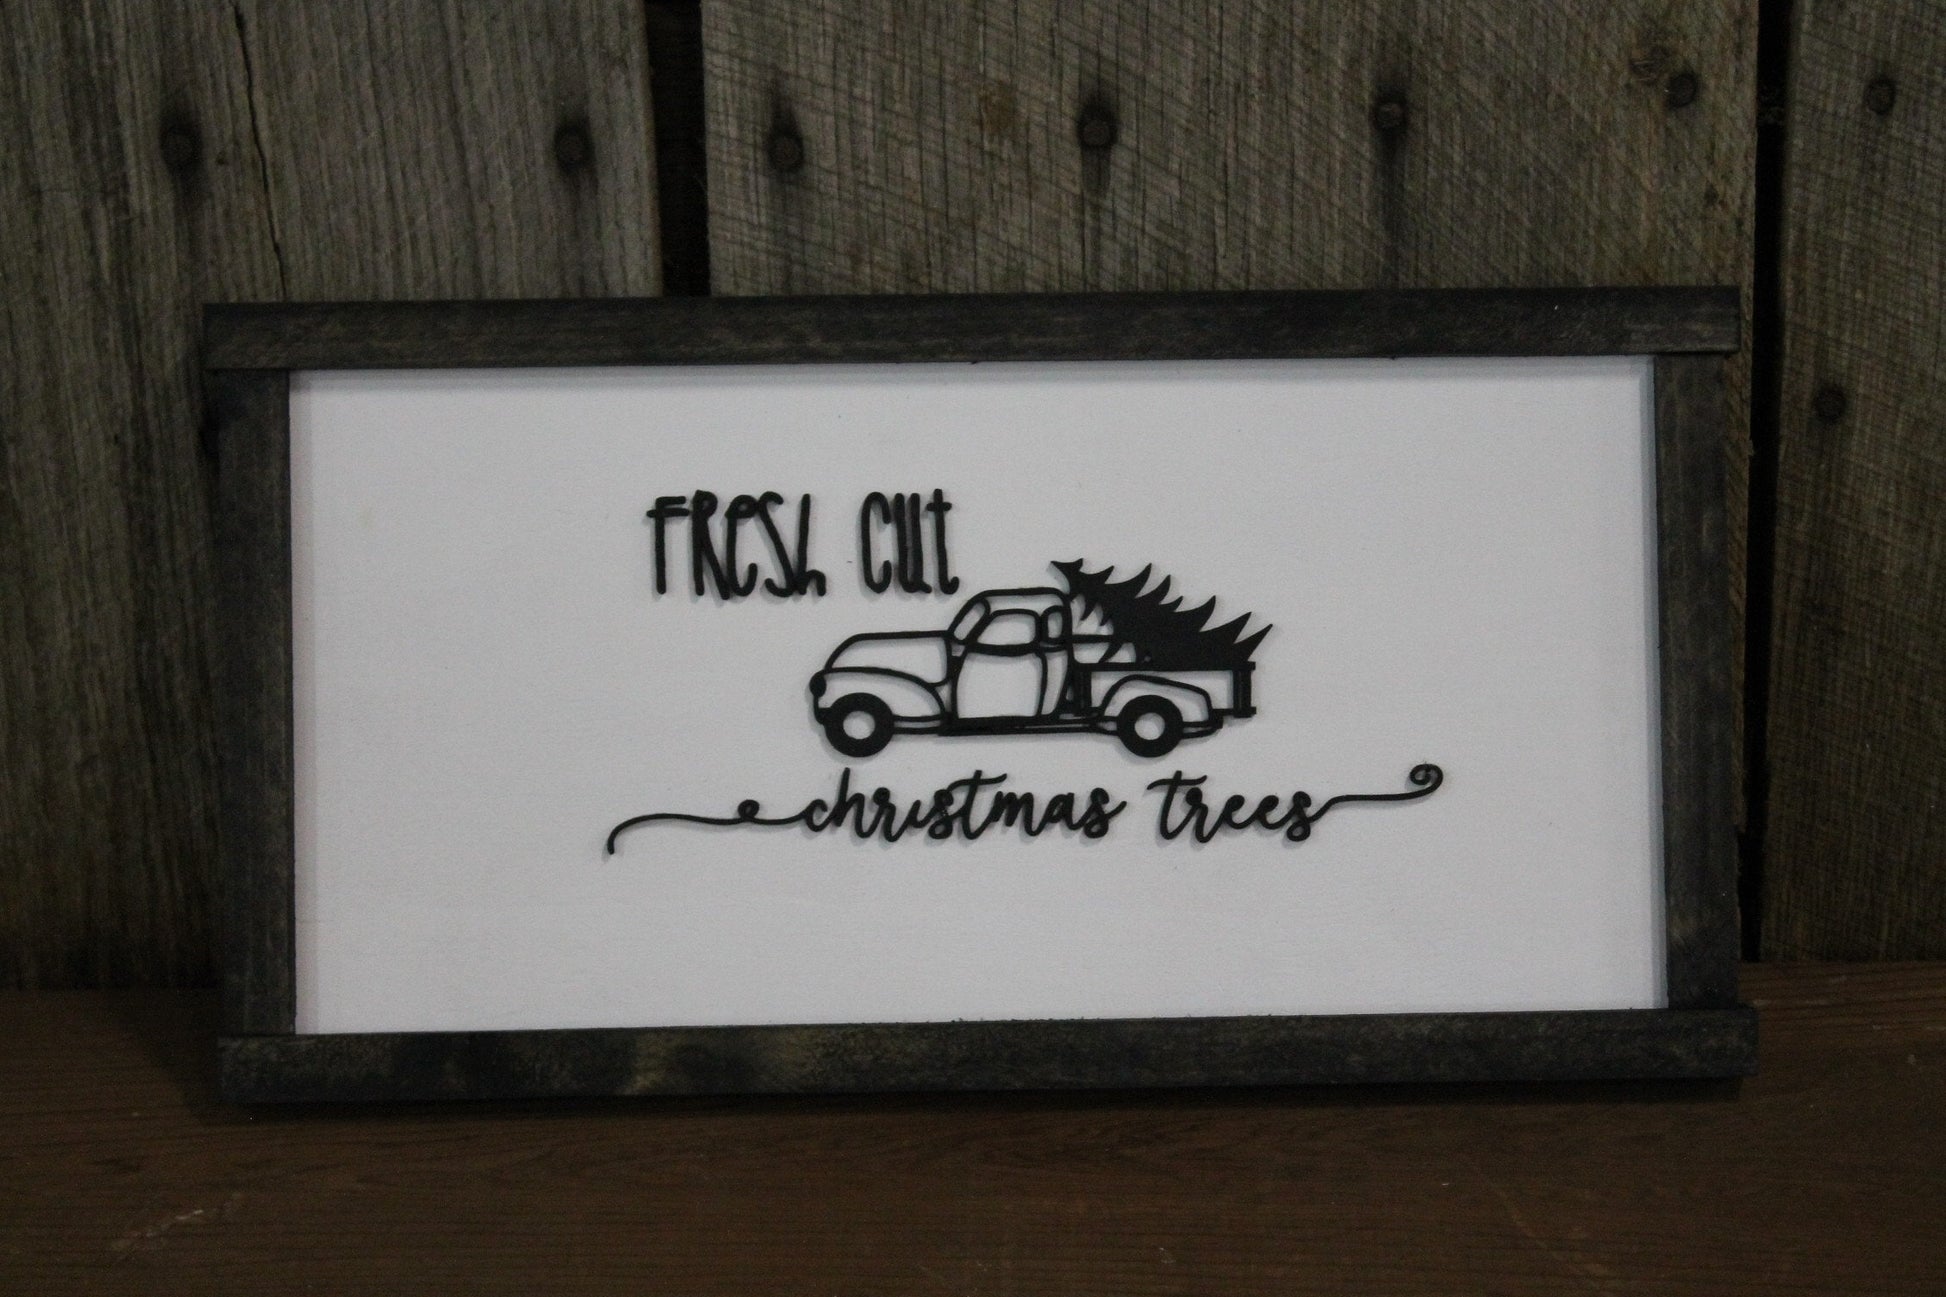 Fresh Cut Christmas Trees, Truck, Raised Text, 3D, Wooden Sign, Wood, Primitive, Shabby Chic, Wall Decor, Black and White, Framed